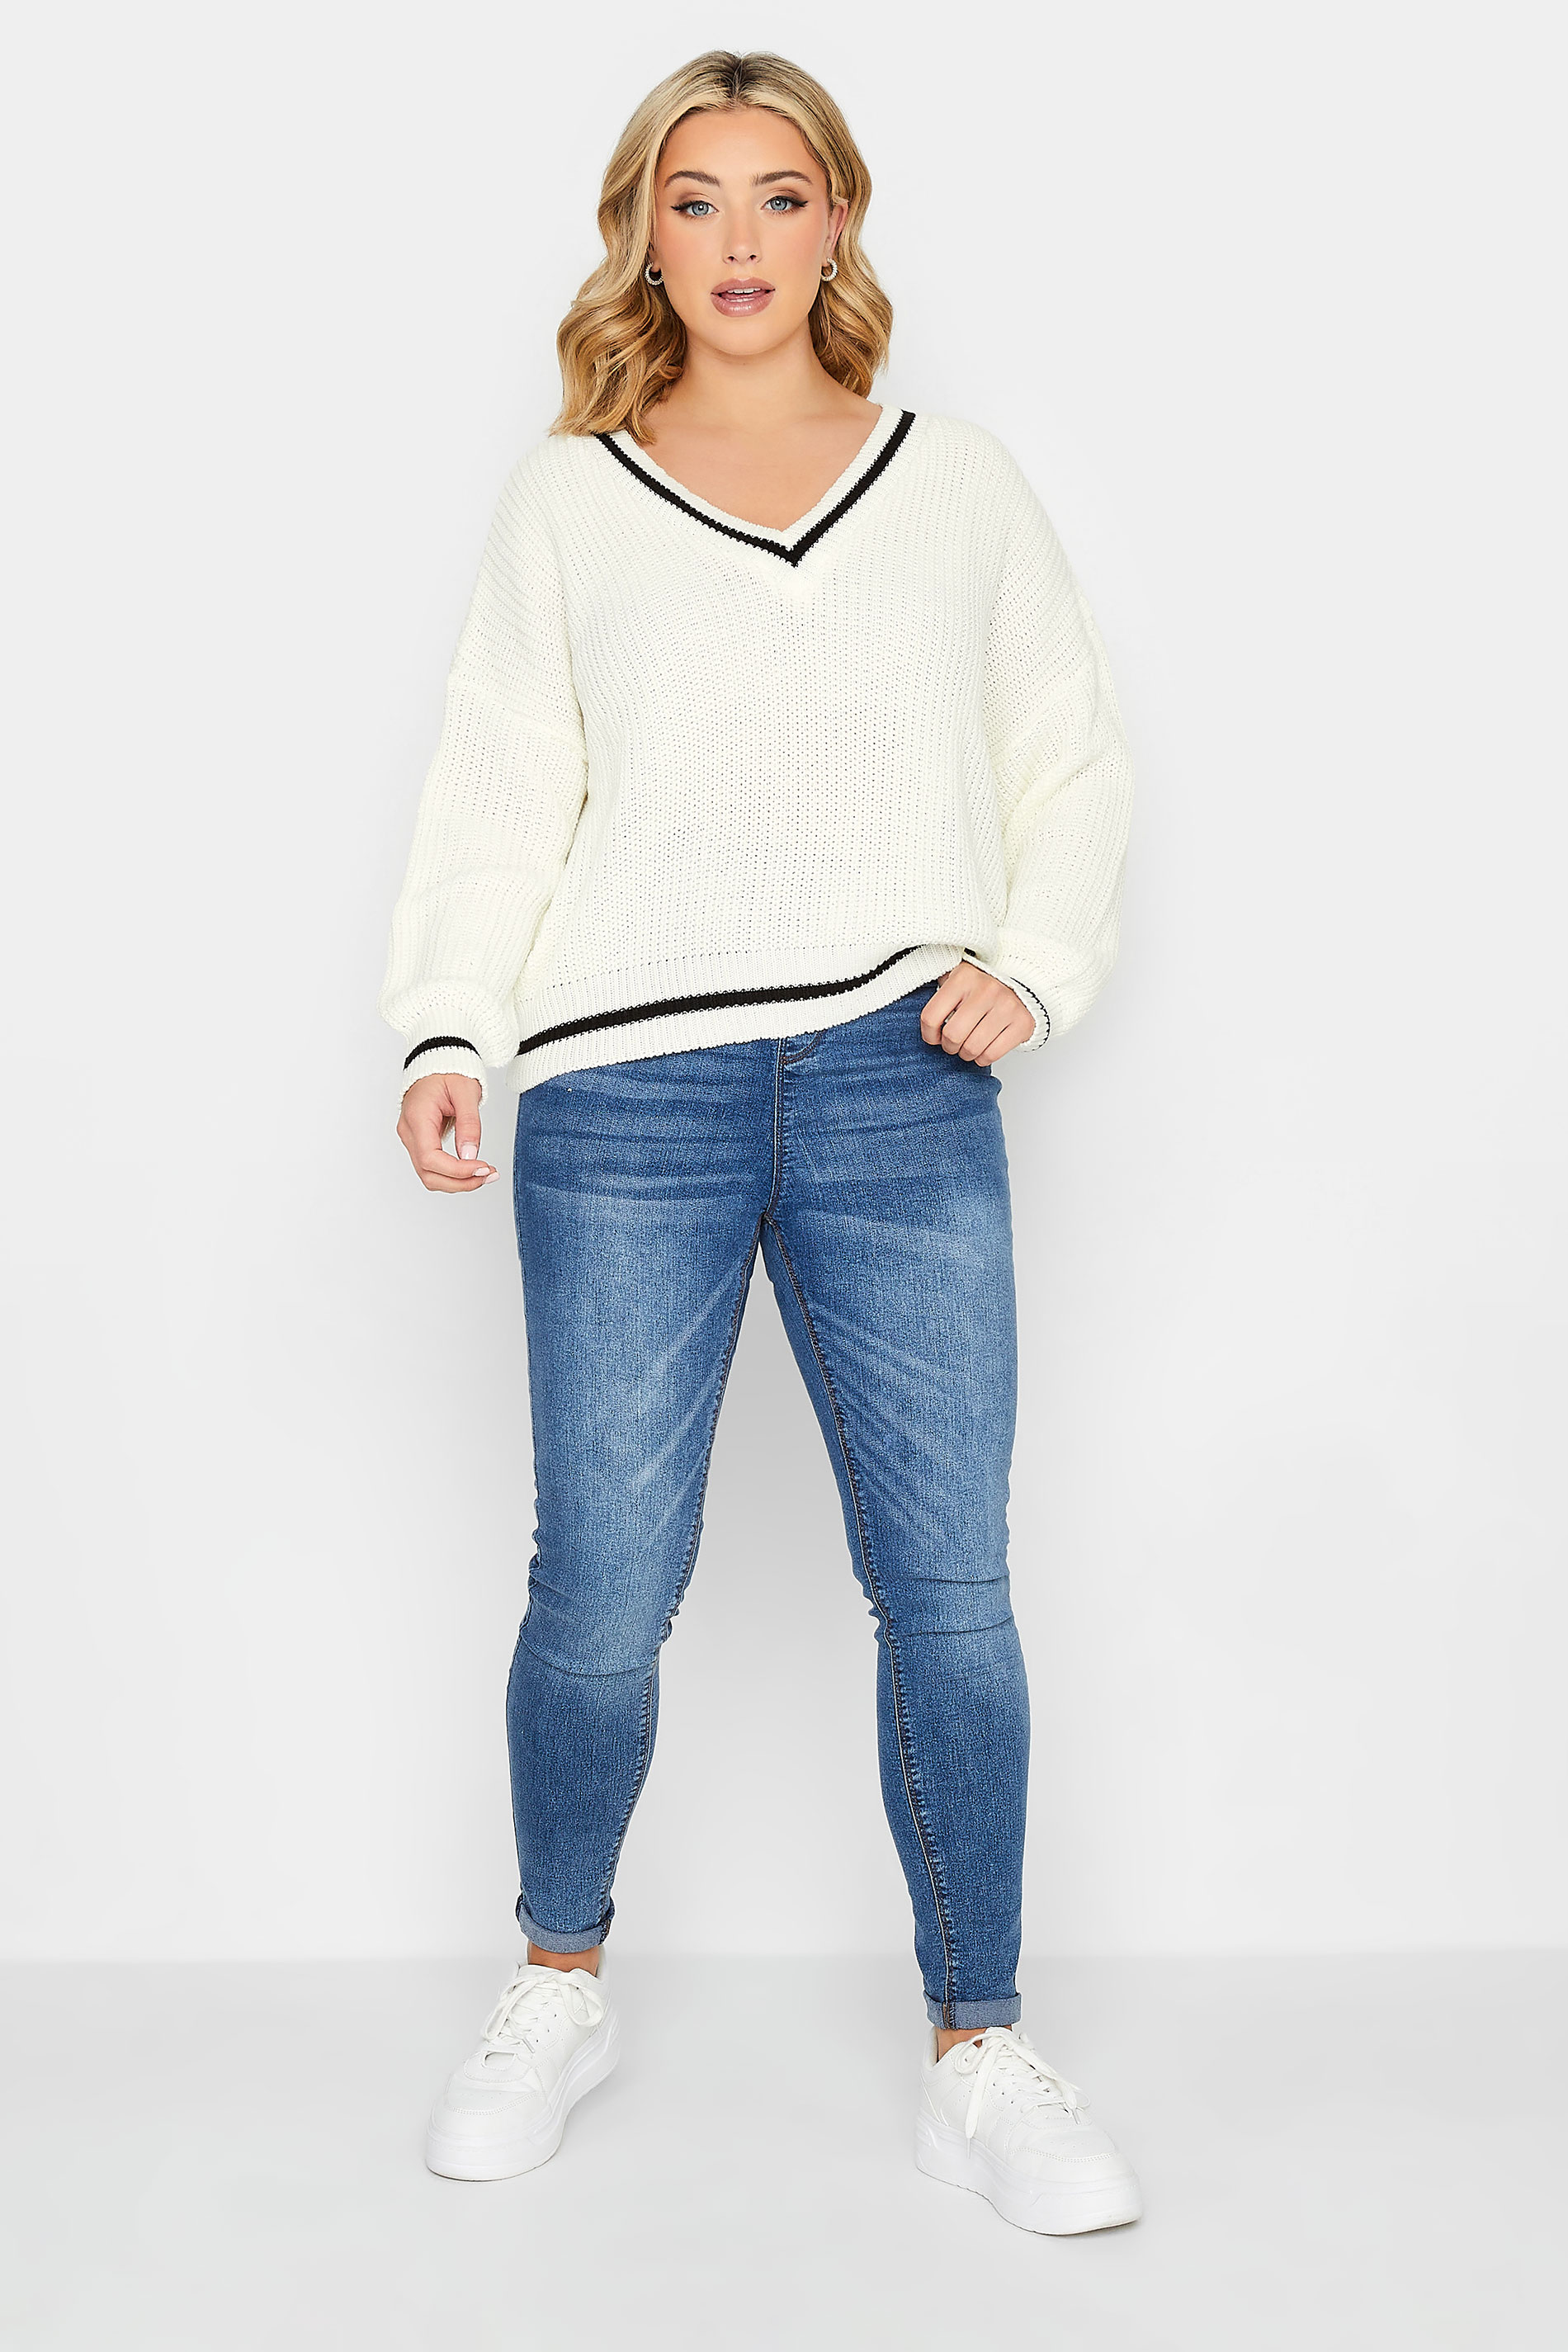 YOURS PETITE Plus Size White Stripe V-Neck Jumper | Yours Clothing 2